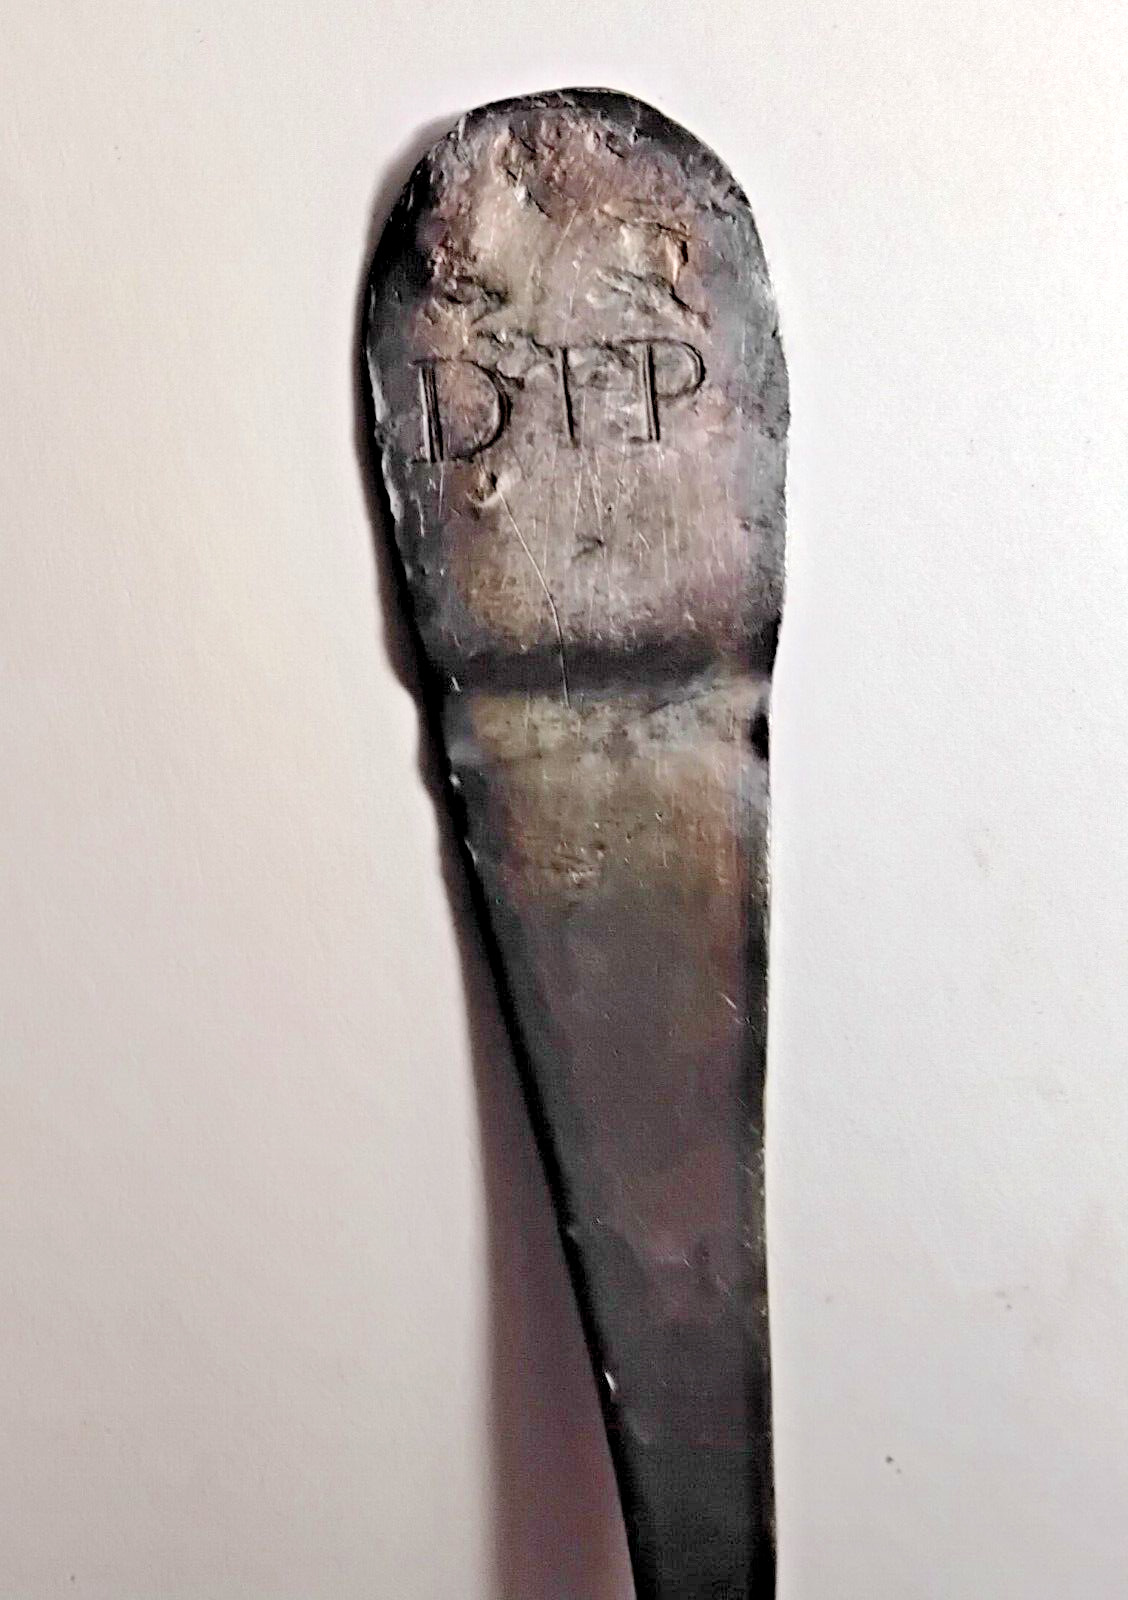 Long silver plated spoon lost by a soldier with initials D.F. P., pit find